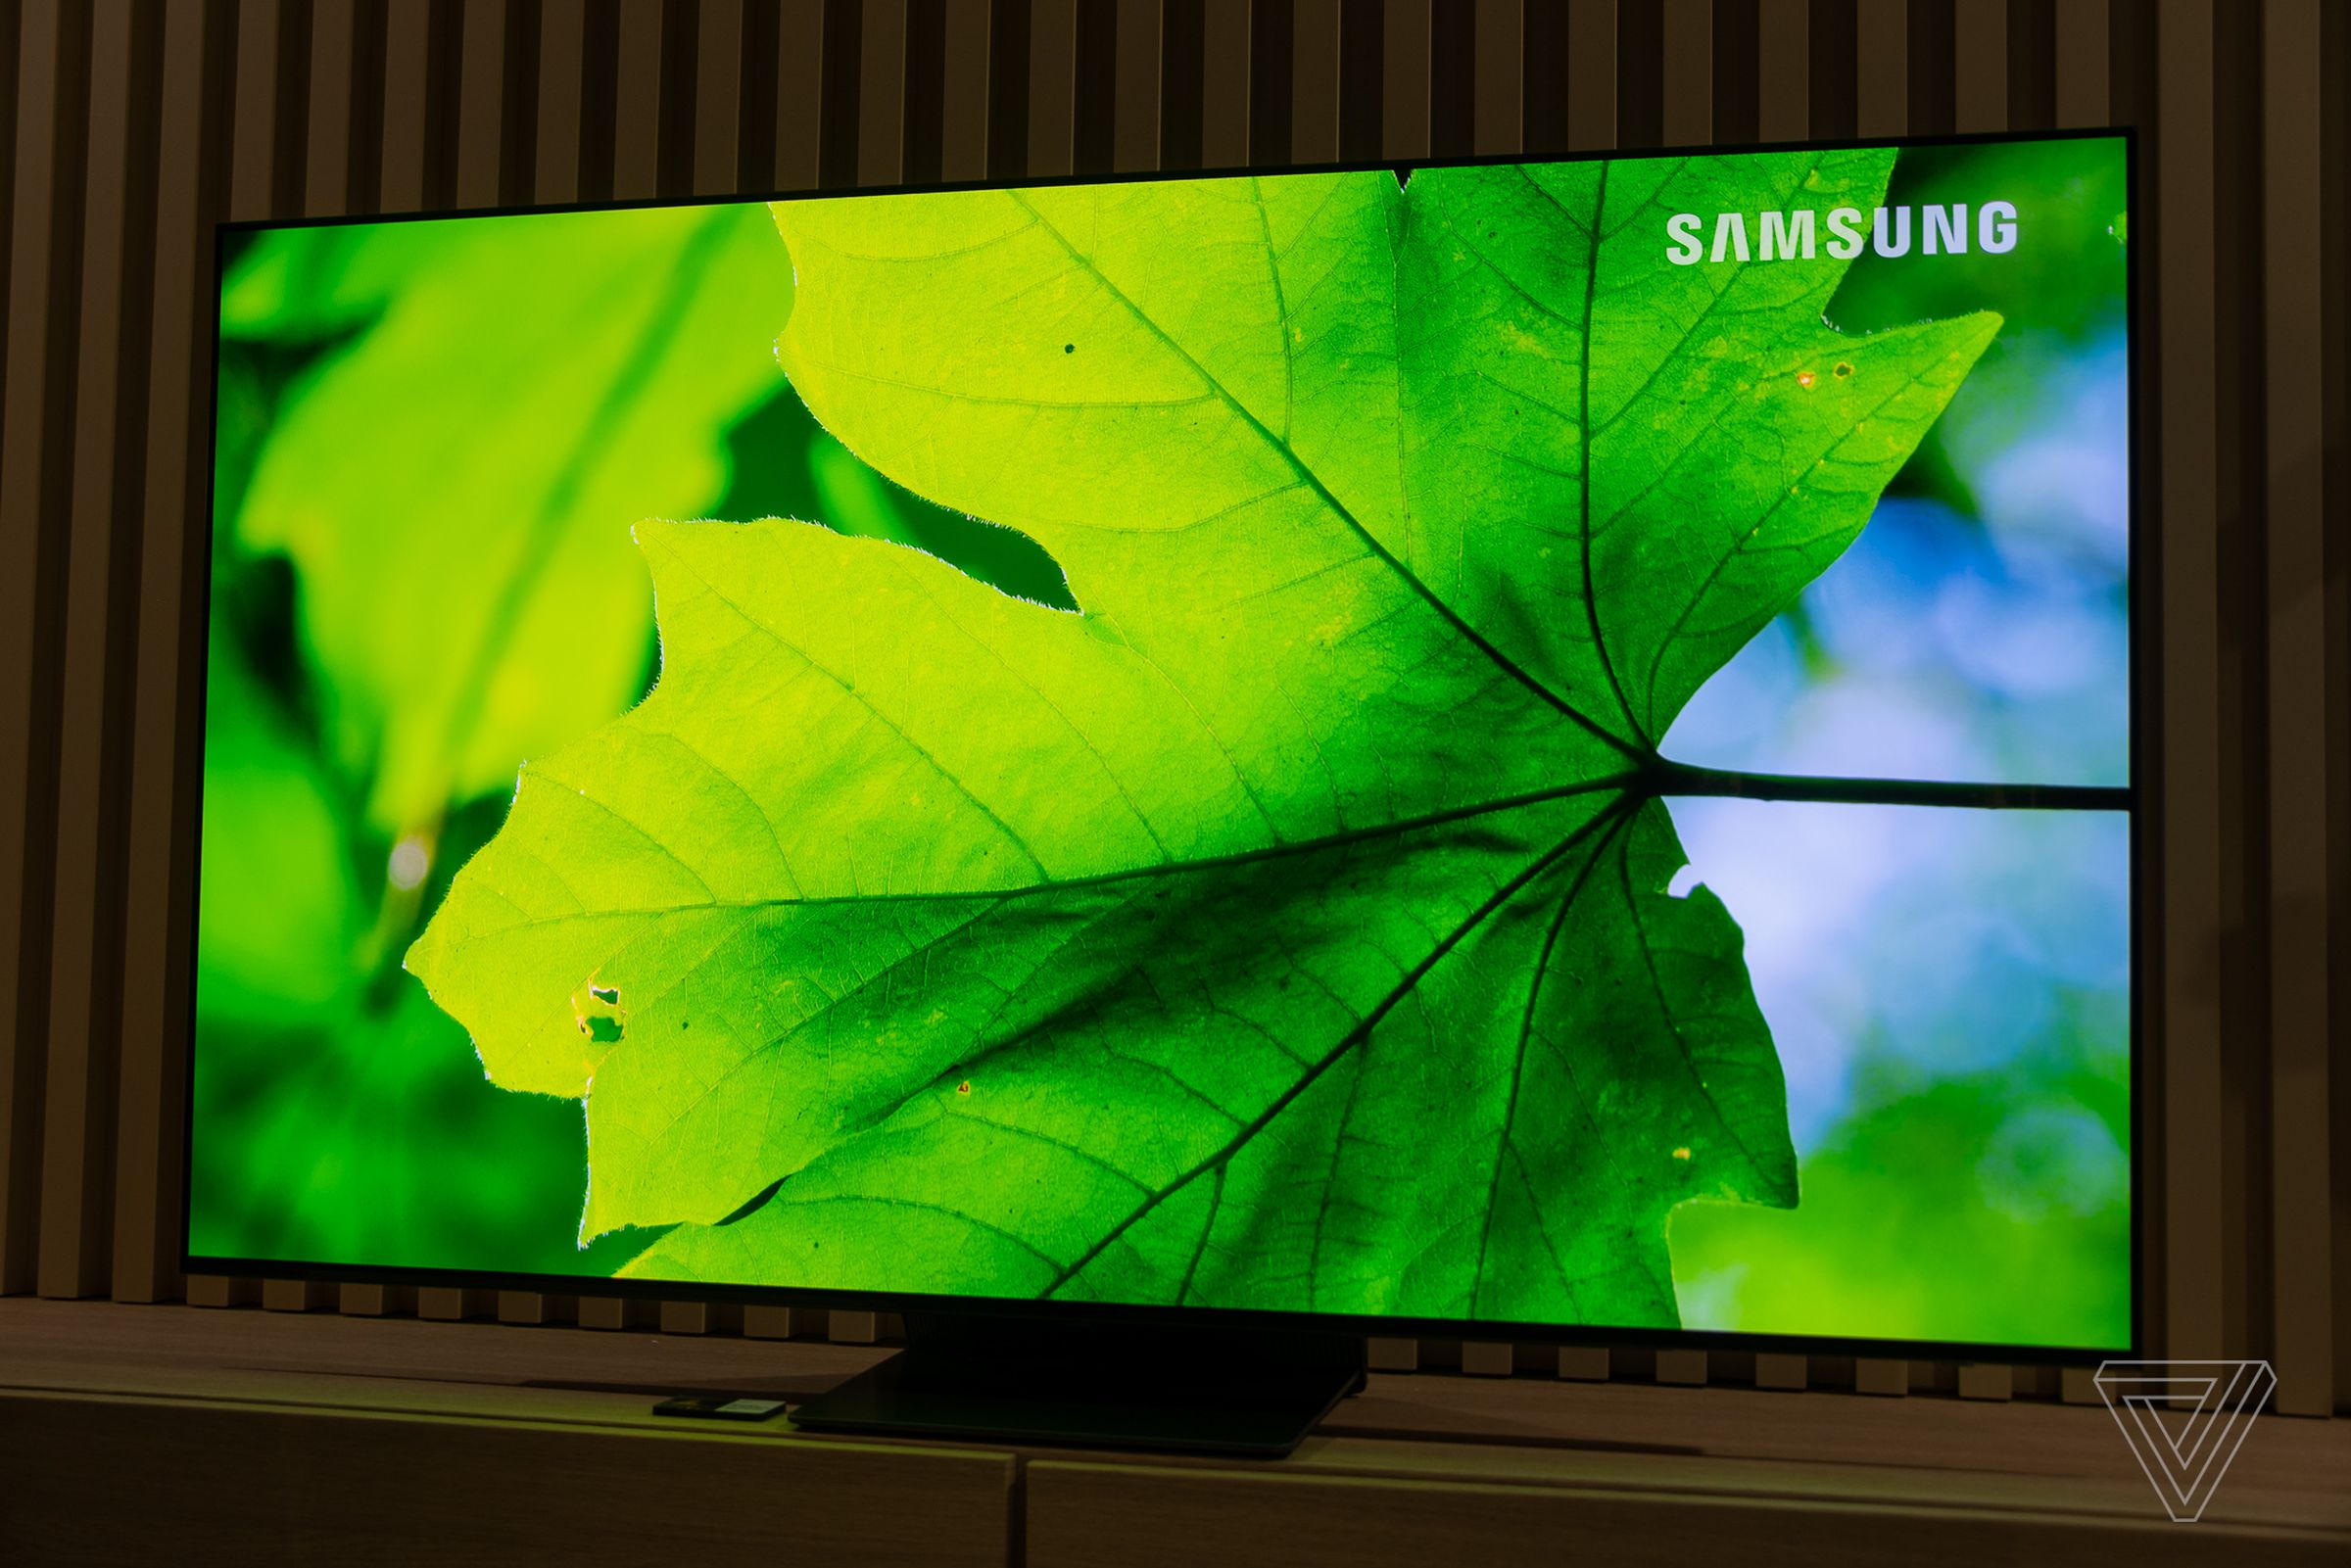 The QD-OLED panel can produce richer colors at higher brightness levels.